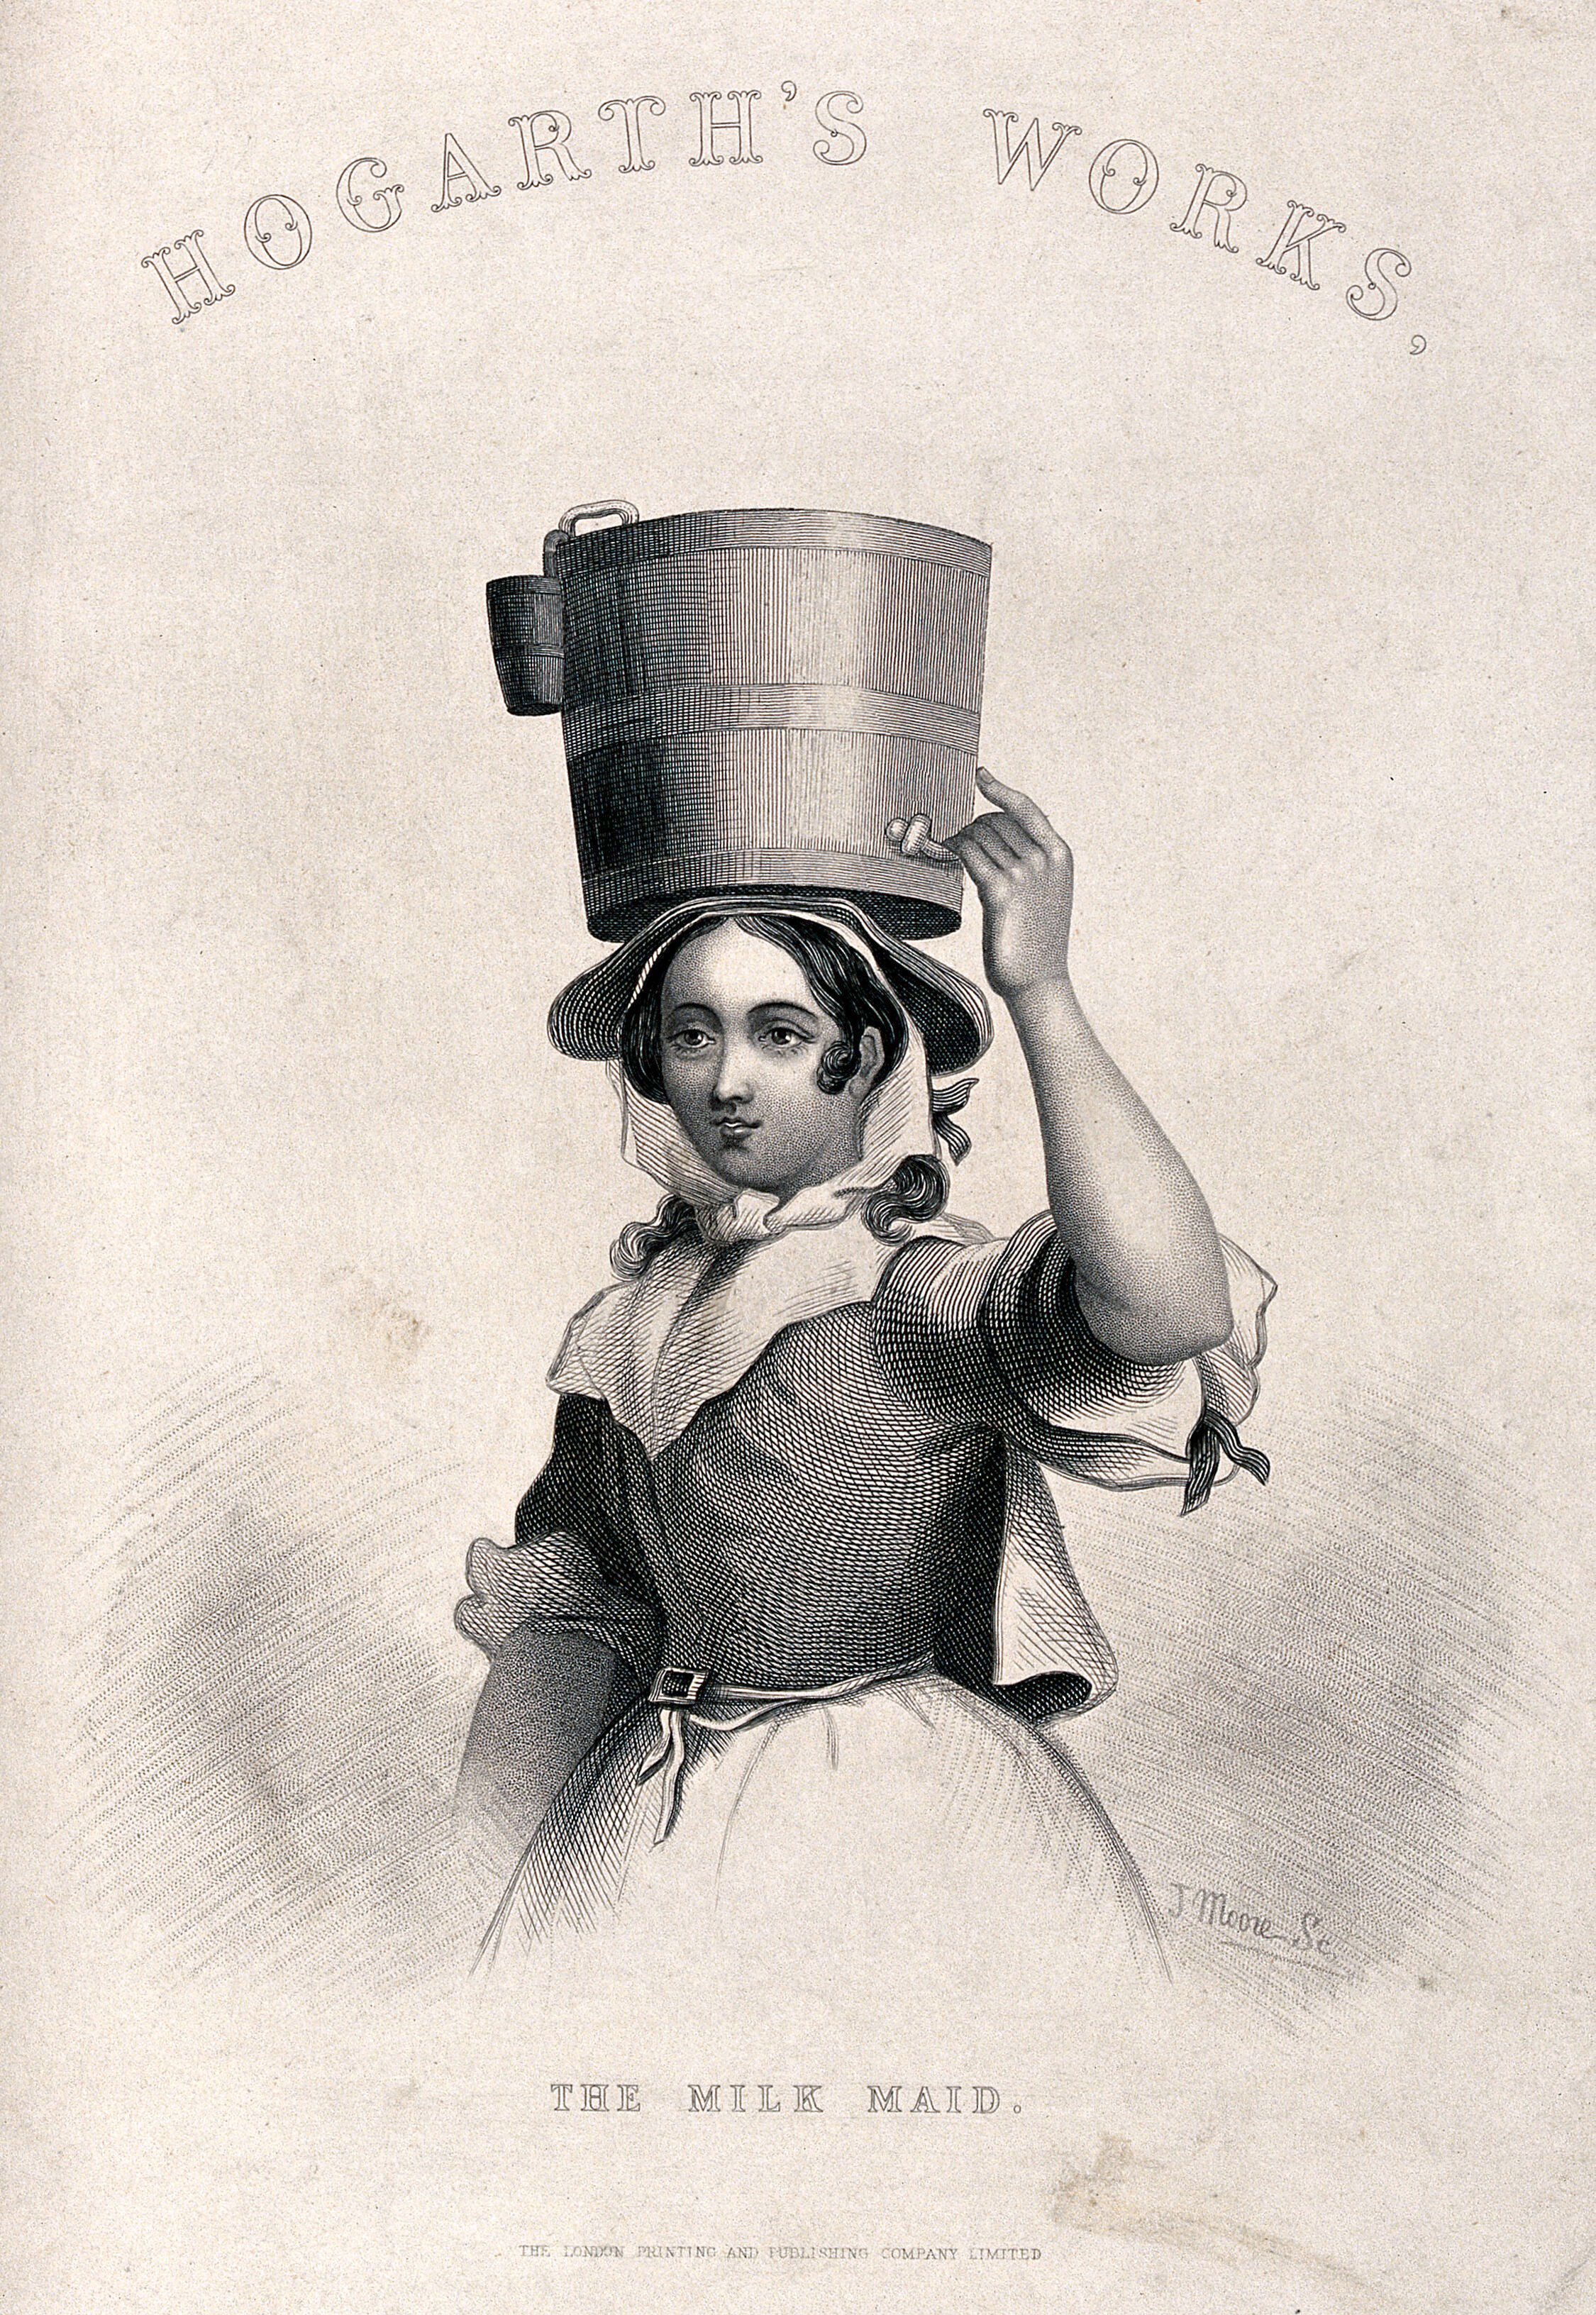 A milk maid holding a milk pail on her head. Engraving by J. Moore